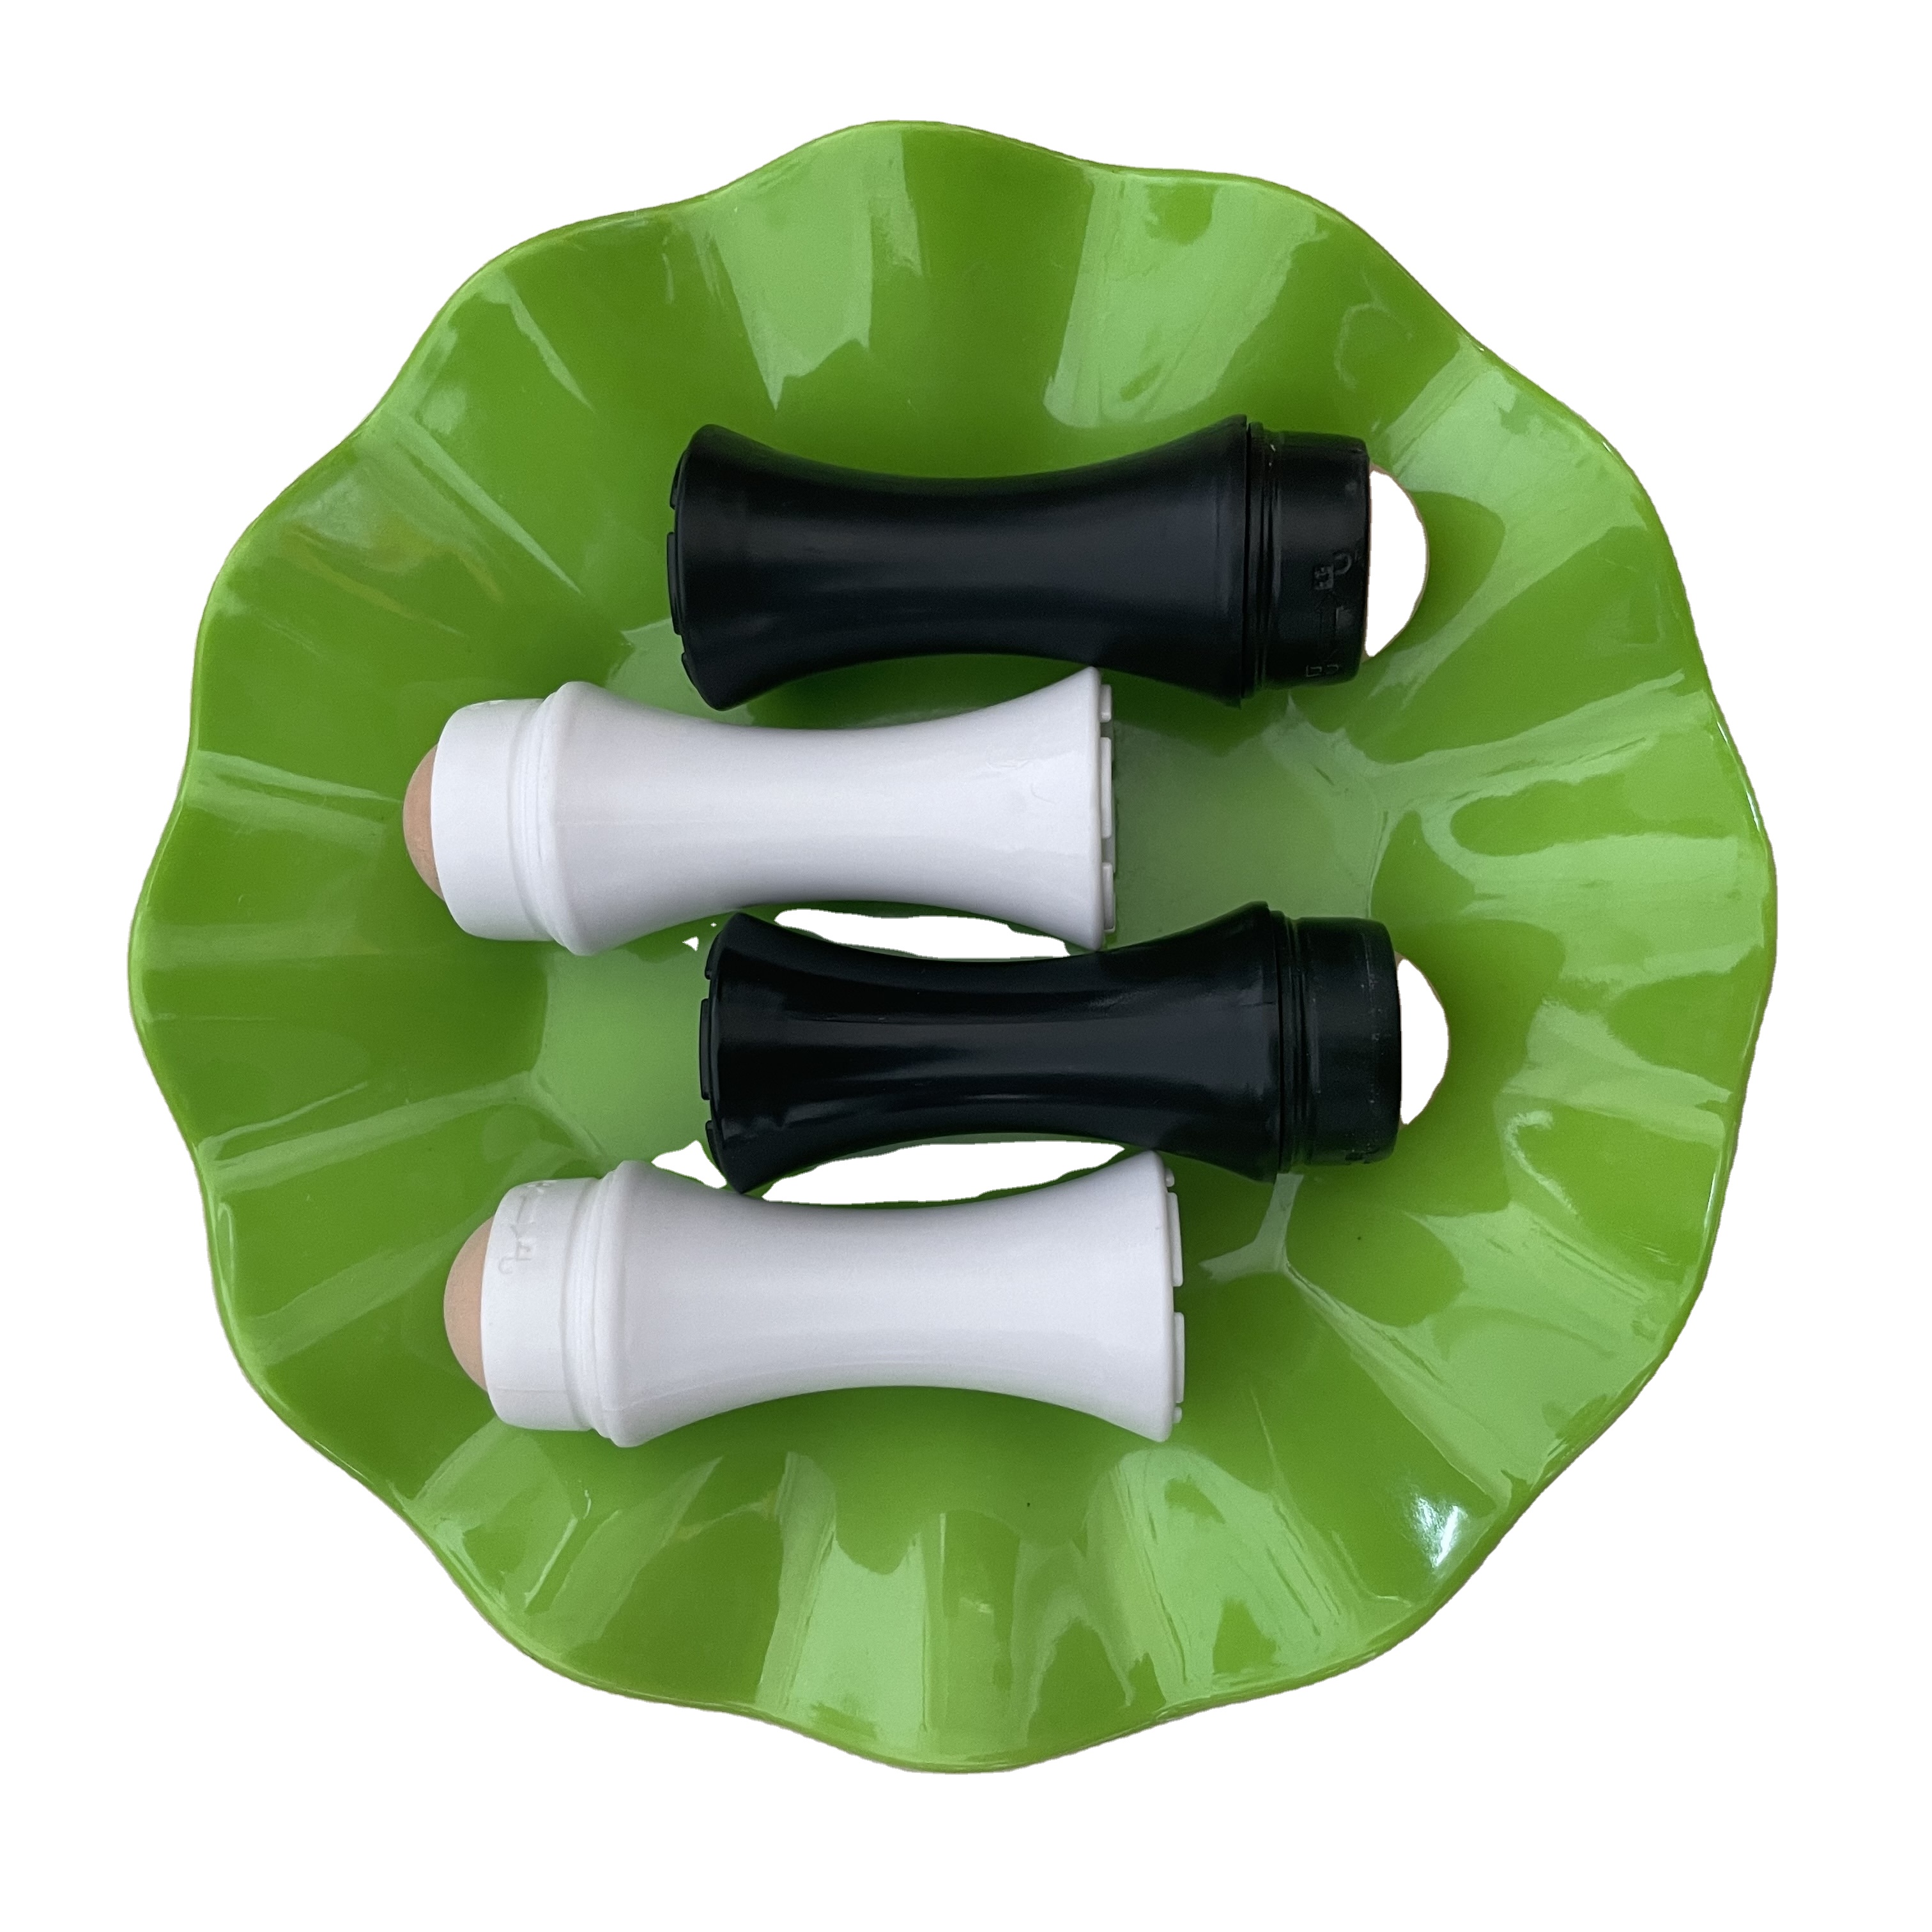 Reusable carrier oil Volcanic Stone Ball facial oil absorbing roller with strong body oils control ability